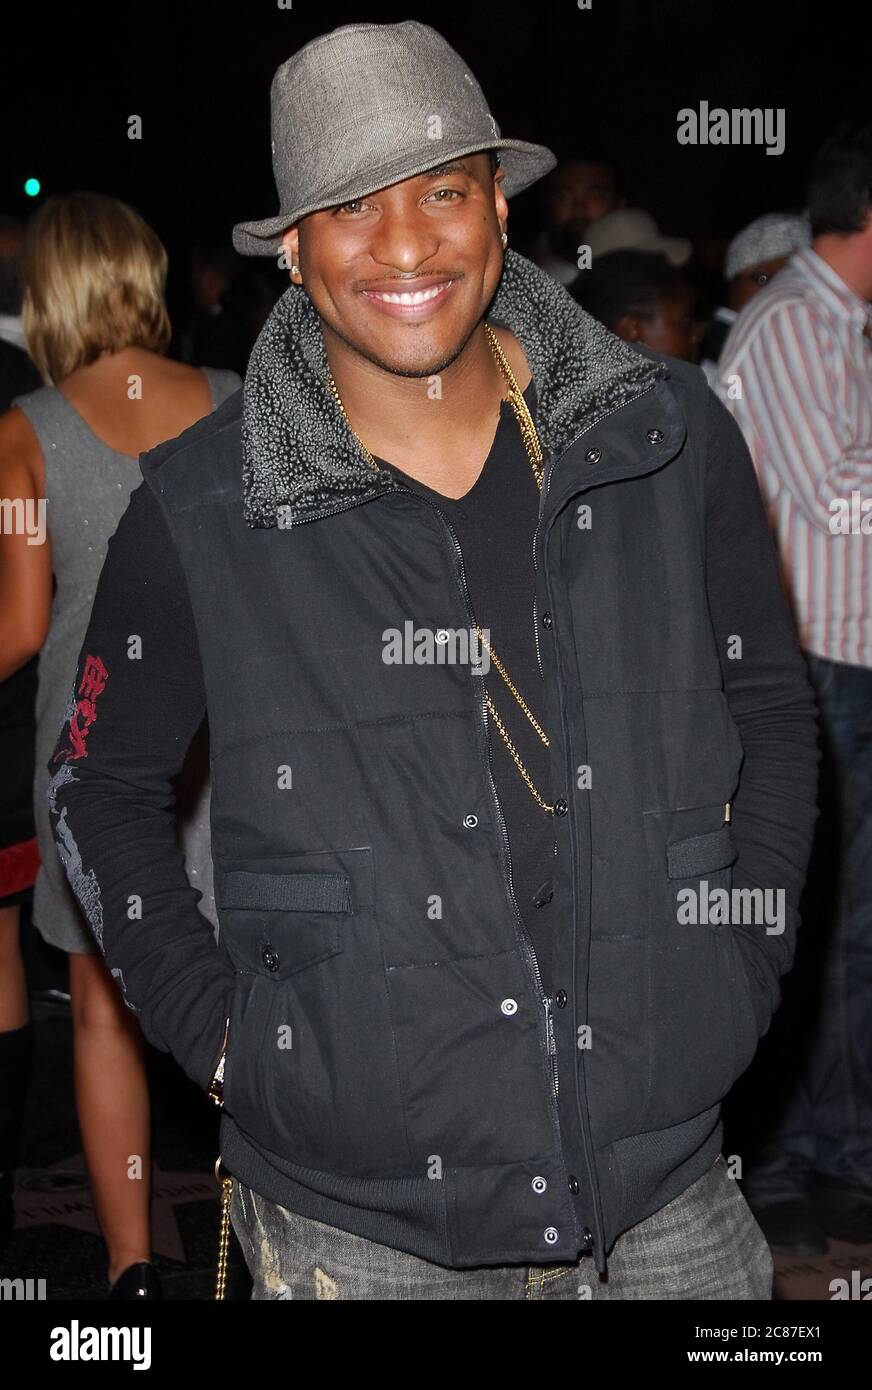 Sterlen Roberts at the Premiere of "Somebody Help Me" held at the Grauman's Chinese Theater in Hollywood, CA. The event took place on Thursday, October25, 2007. Photo by: SBM / PictureLux- File Reference # 34006-9660SBMPLX Stock Photo